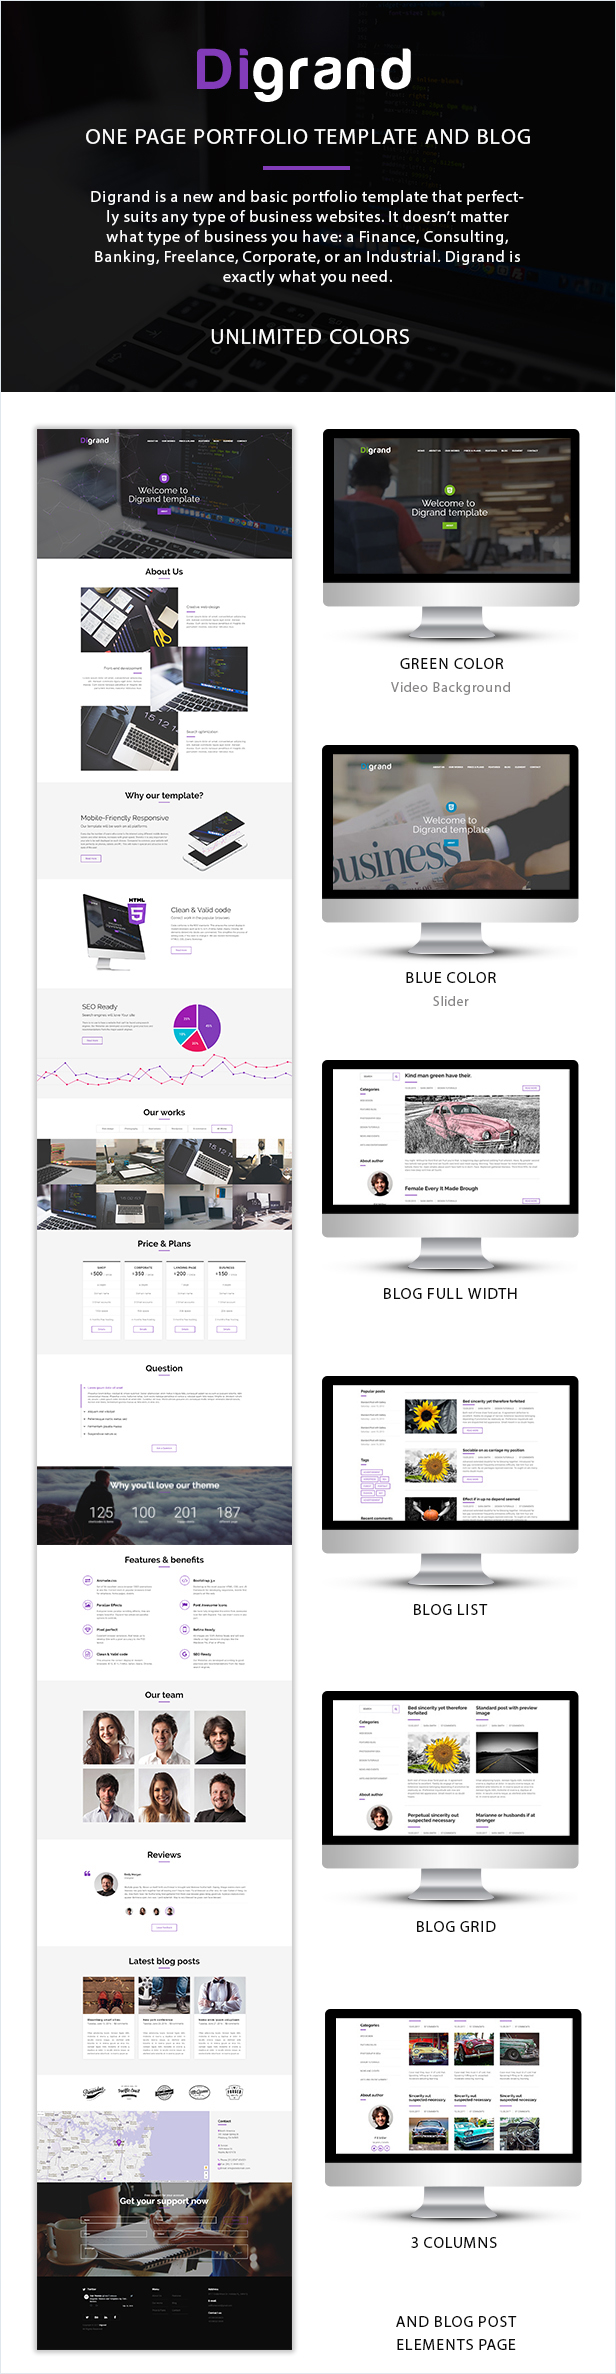 Digrand is a new and basic portfolio template that perfectly suits any type of business websites